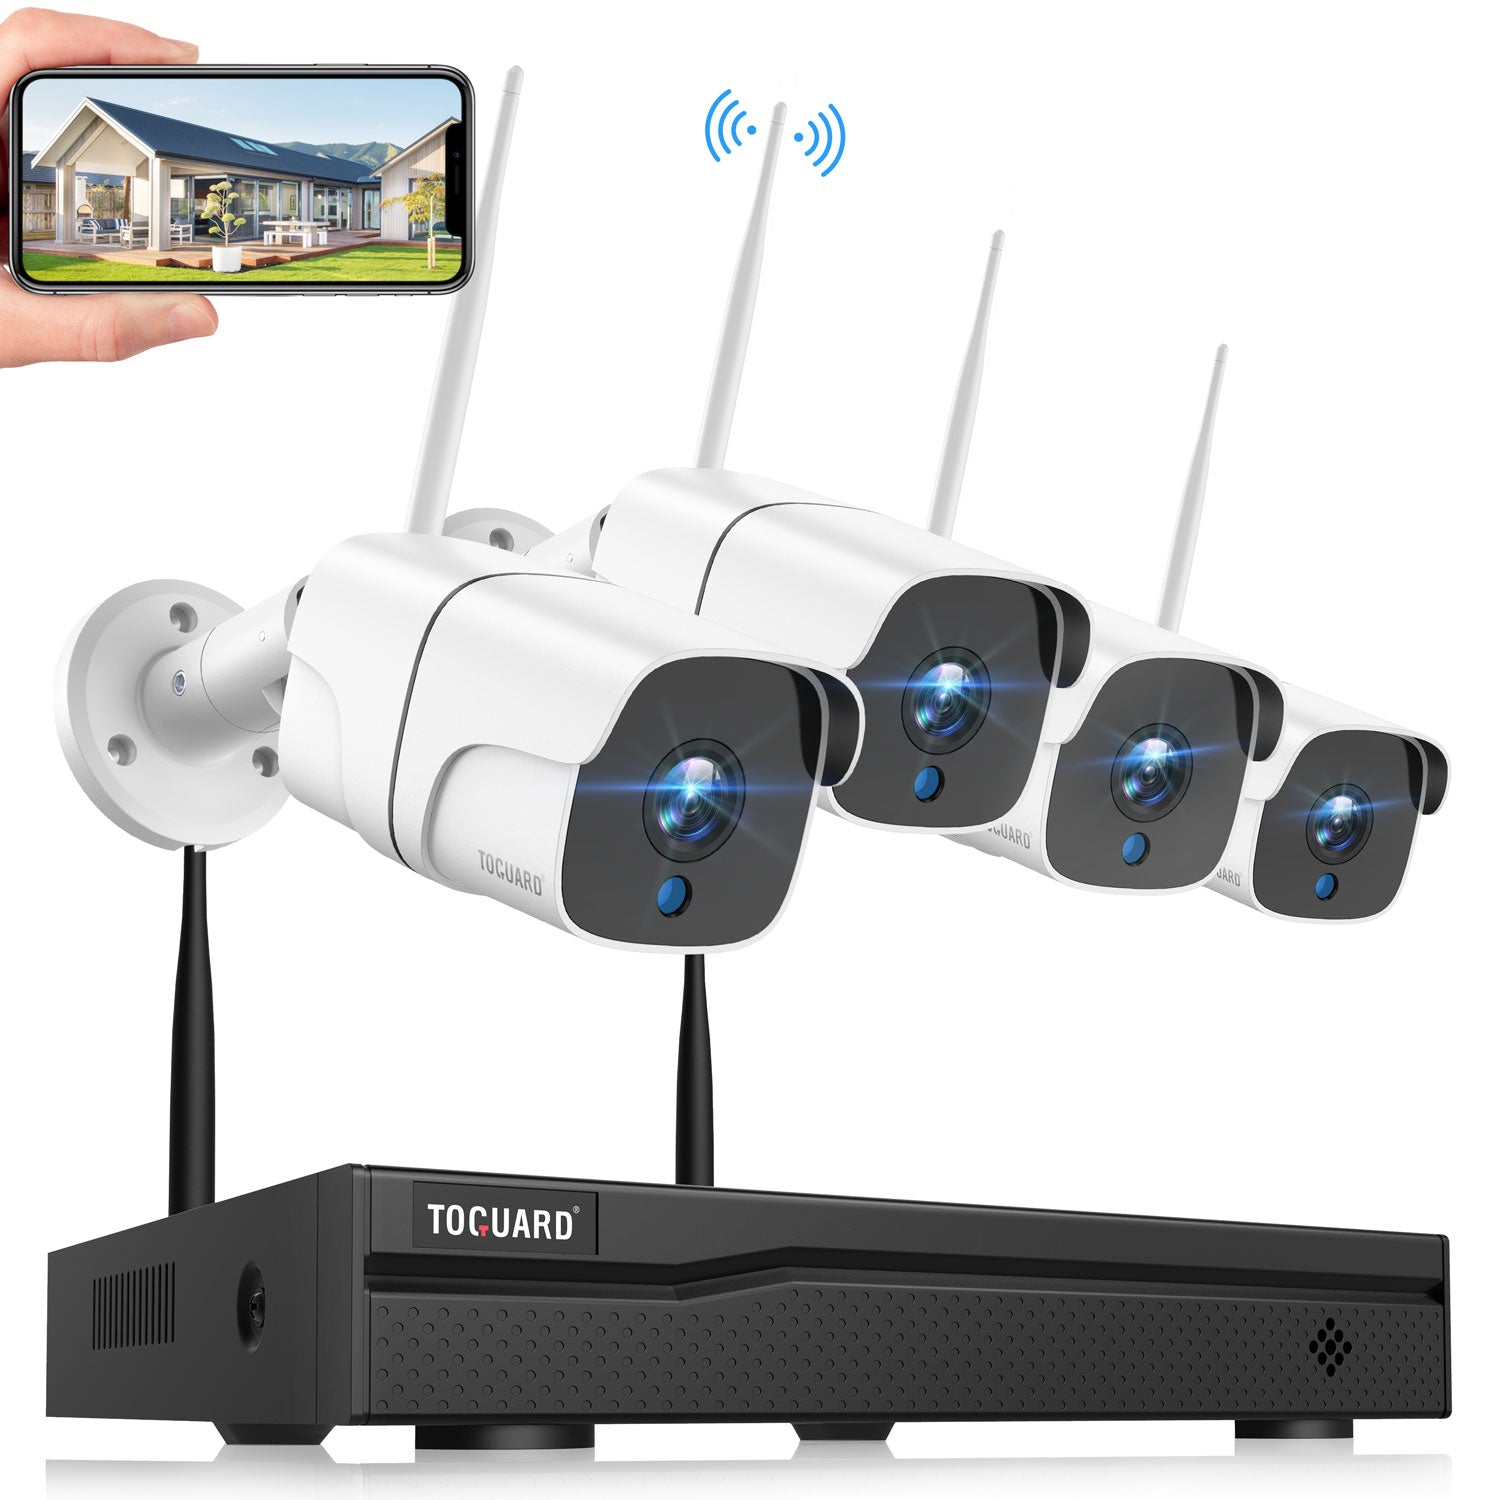 Toguard W300 4Pcs 1080P Wireless WiFi  Surveillance Camera System With 1TB Hard Drive (Only Available in The US and Europe)